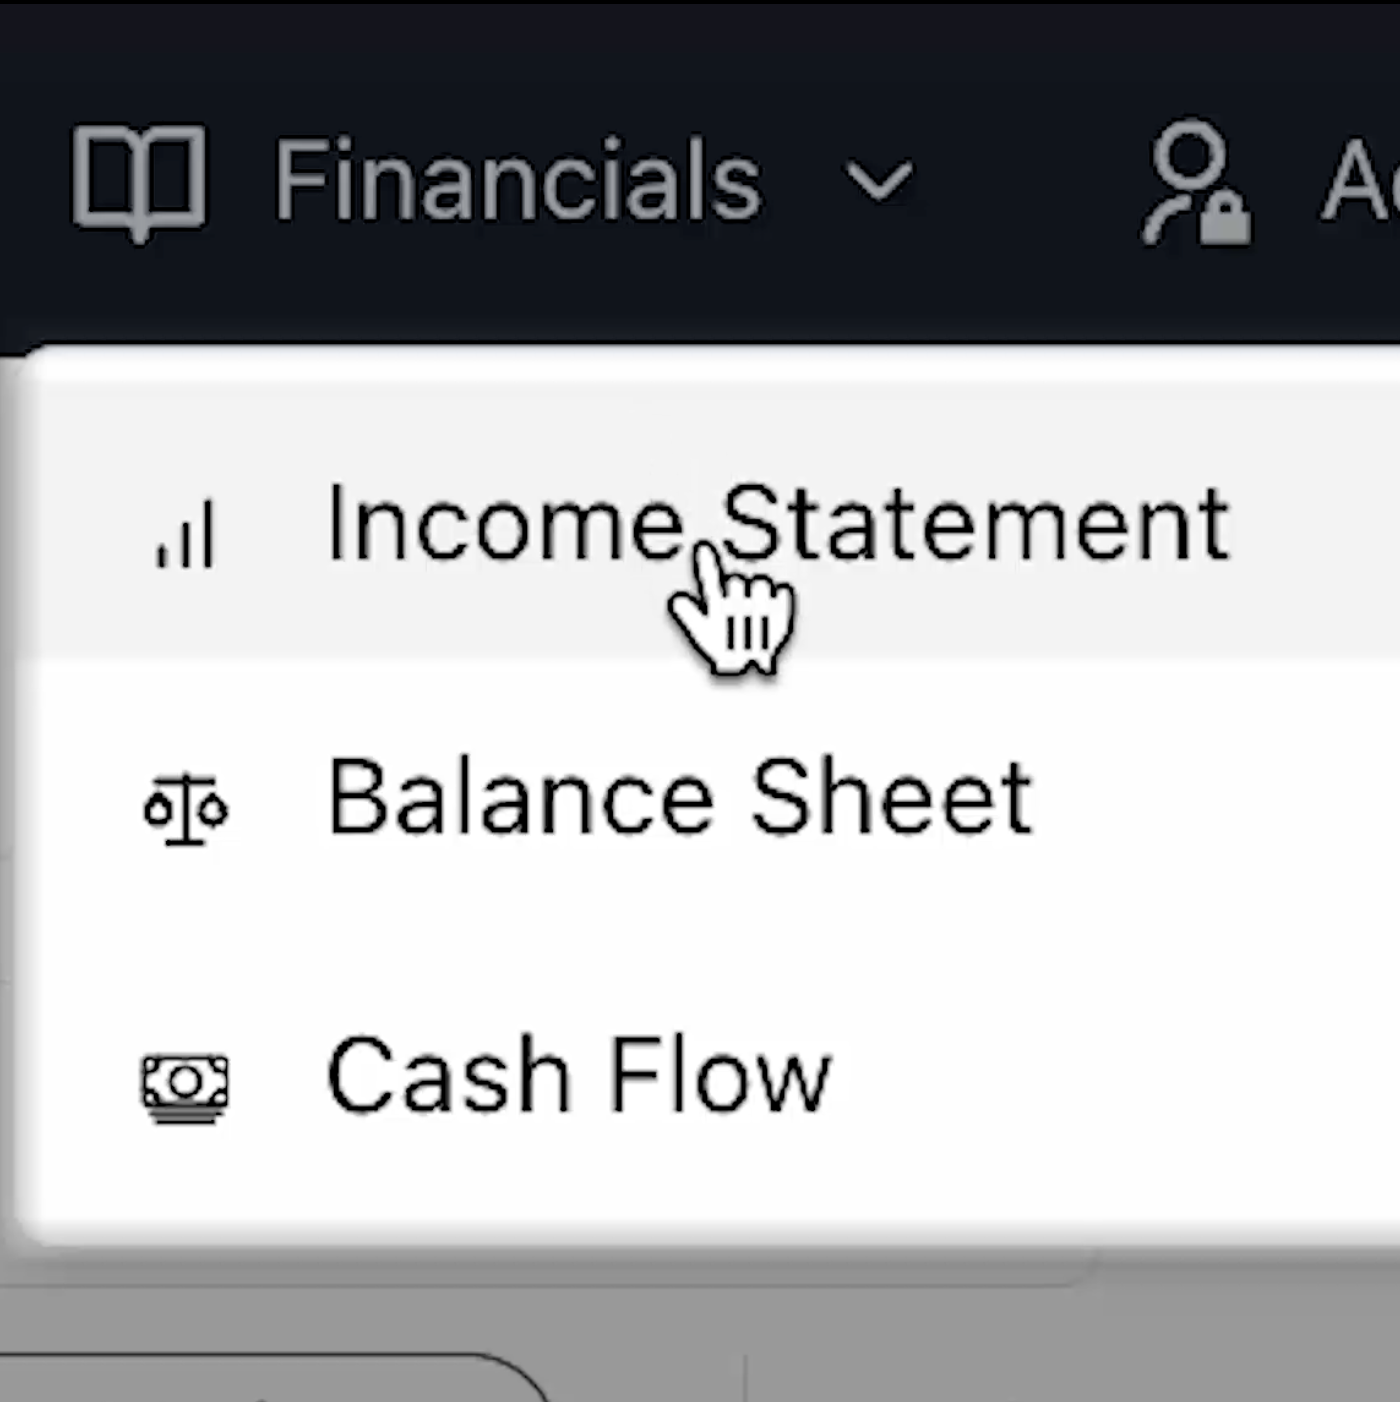 Raise capital with the right financials, income statements, balance sheets, and cash flow reports.